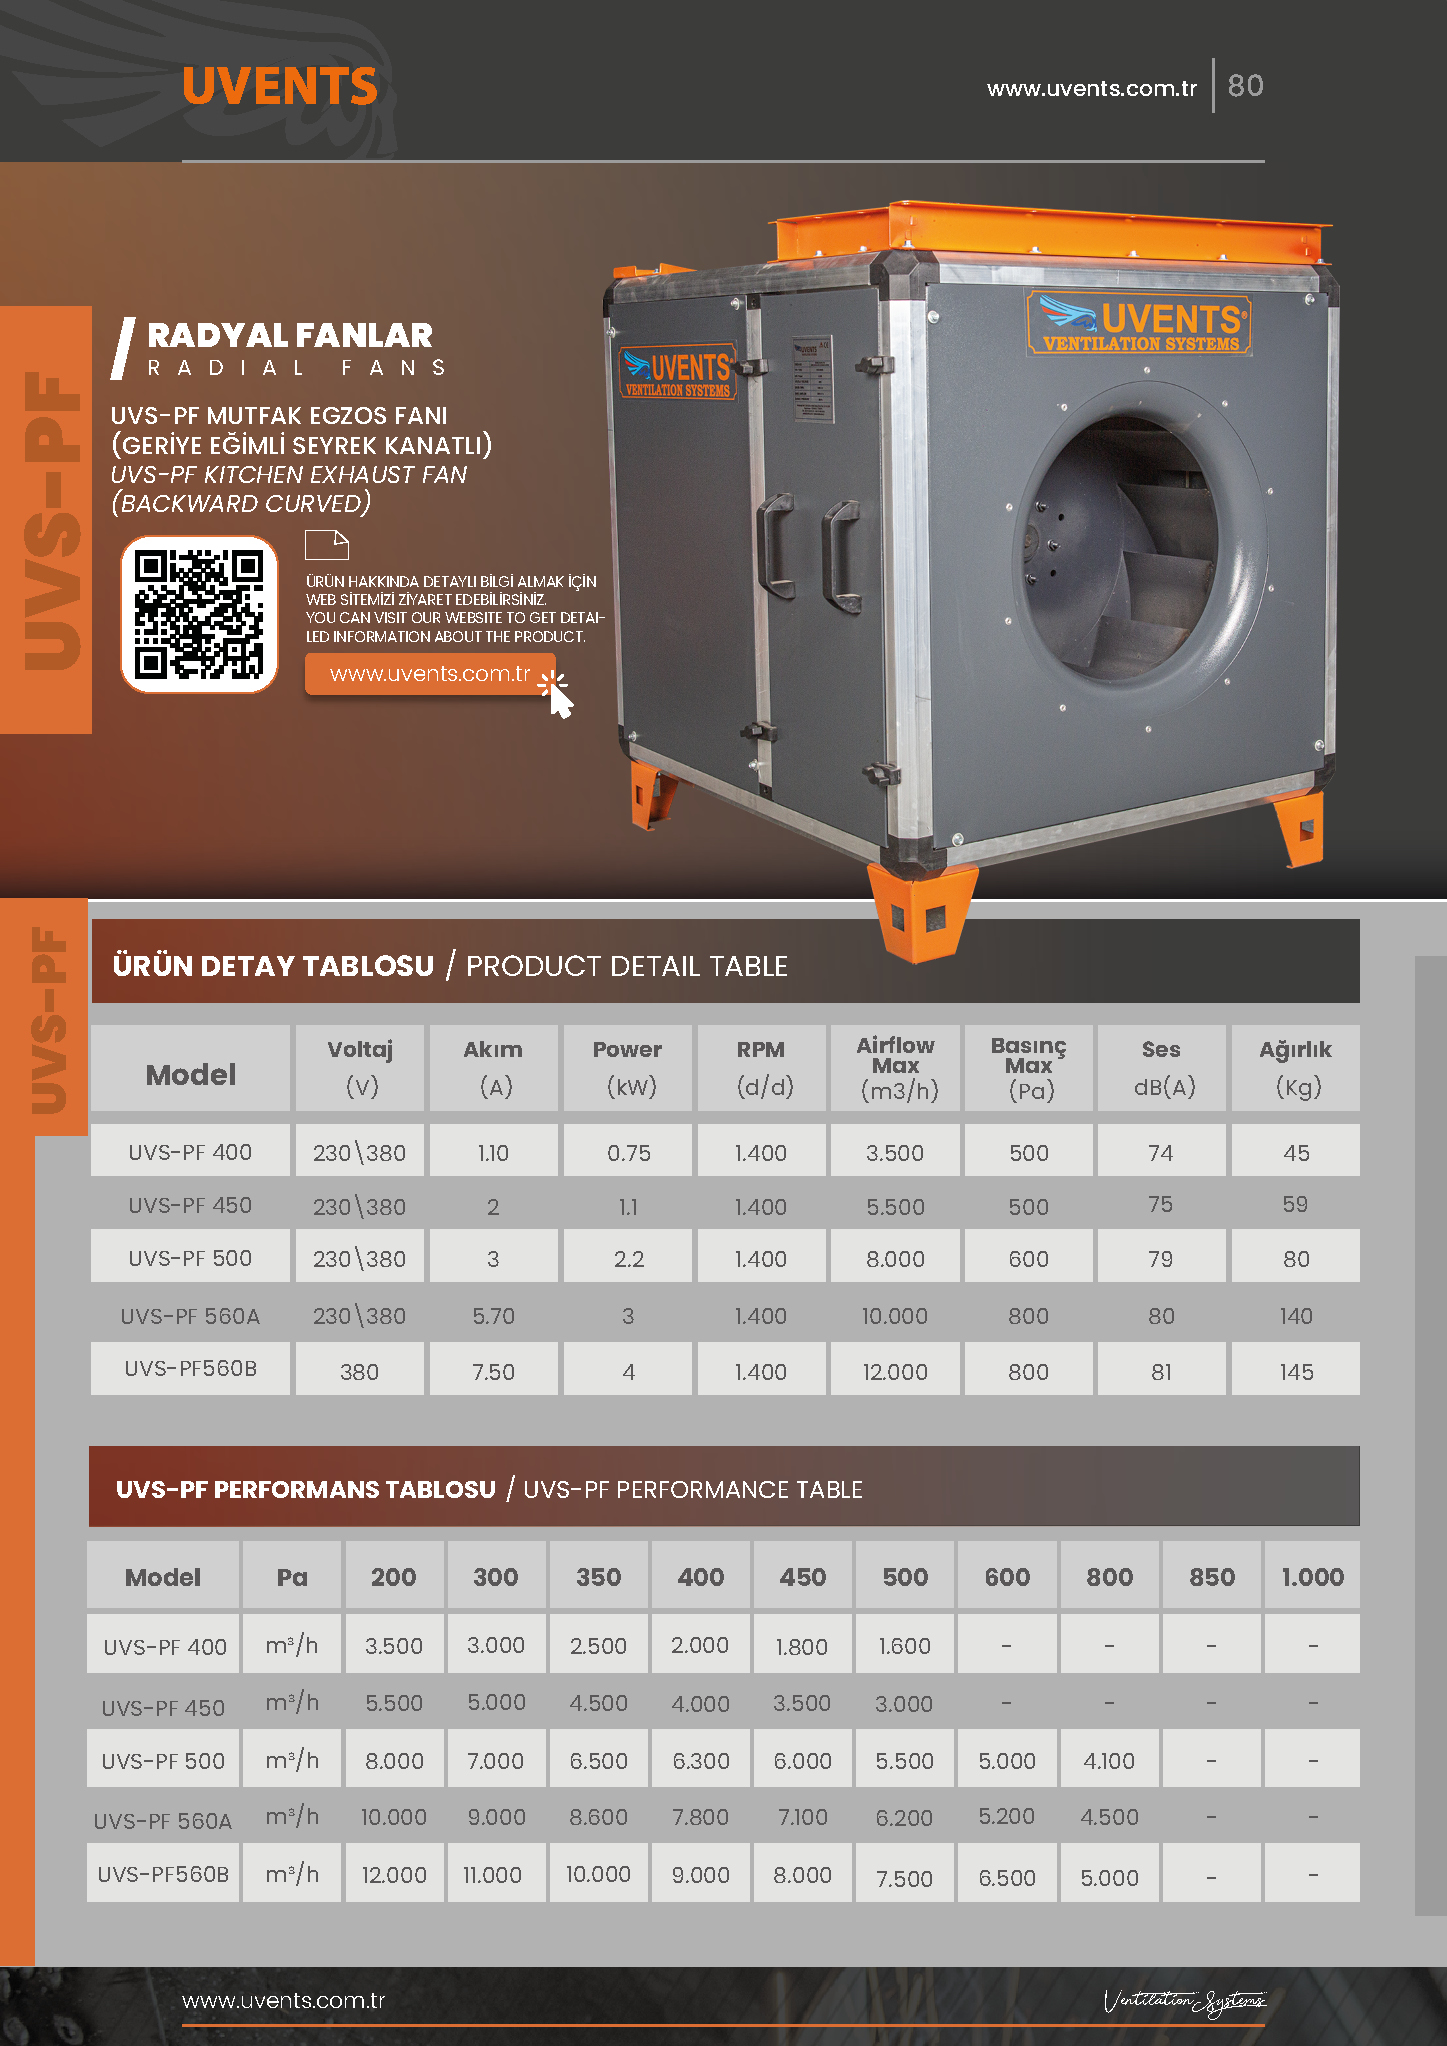 UVS-PF KITCHEN EXHAUST FAN (BACK CURVED SQUARE BLADE)